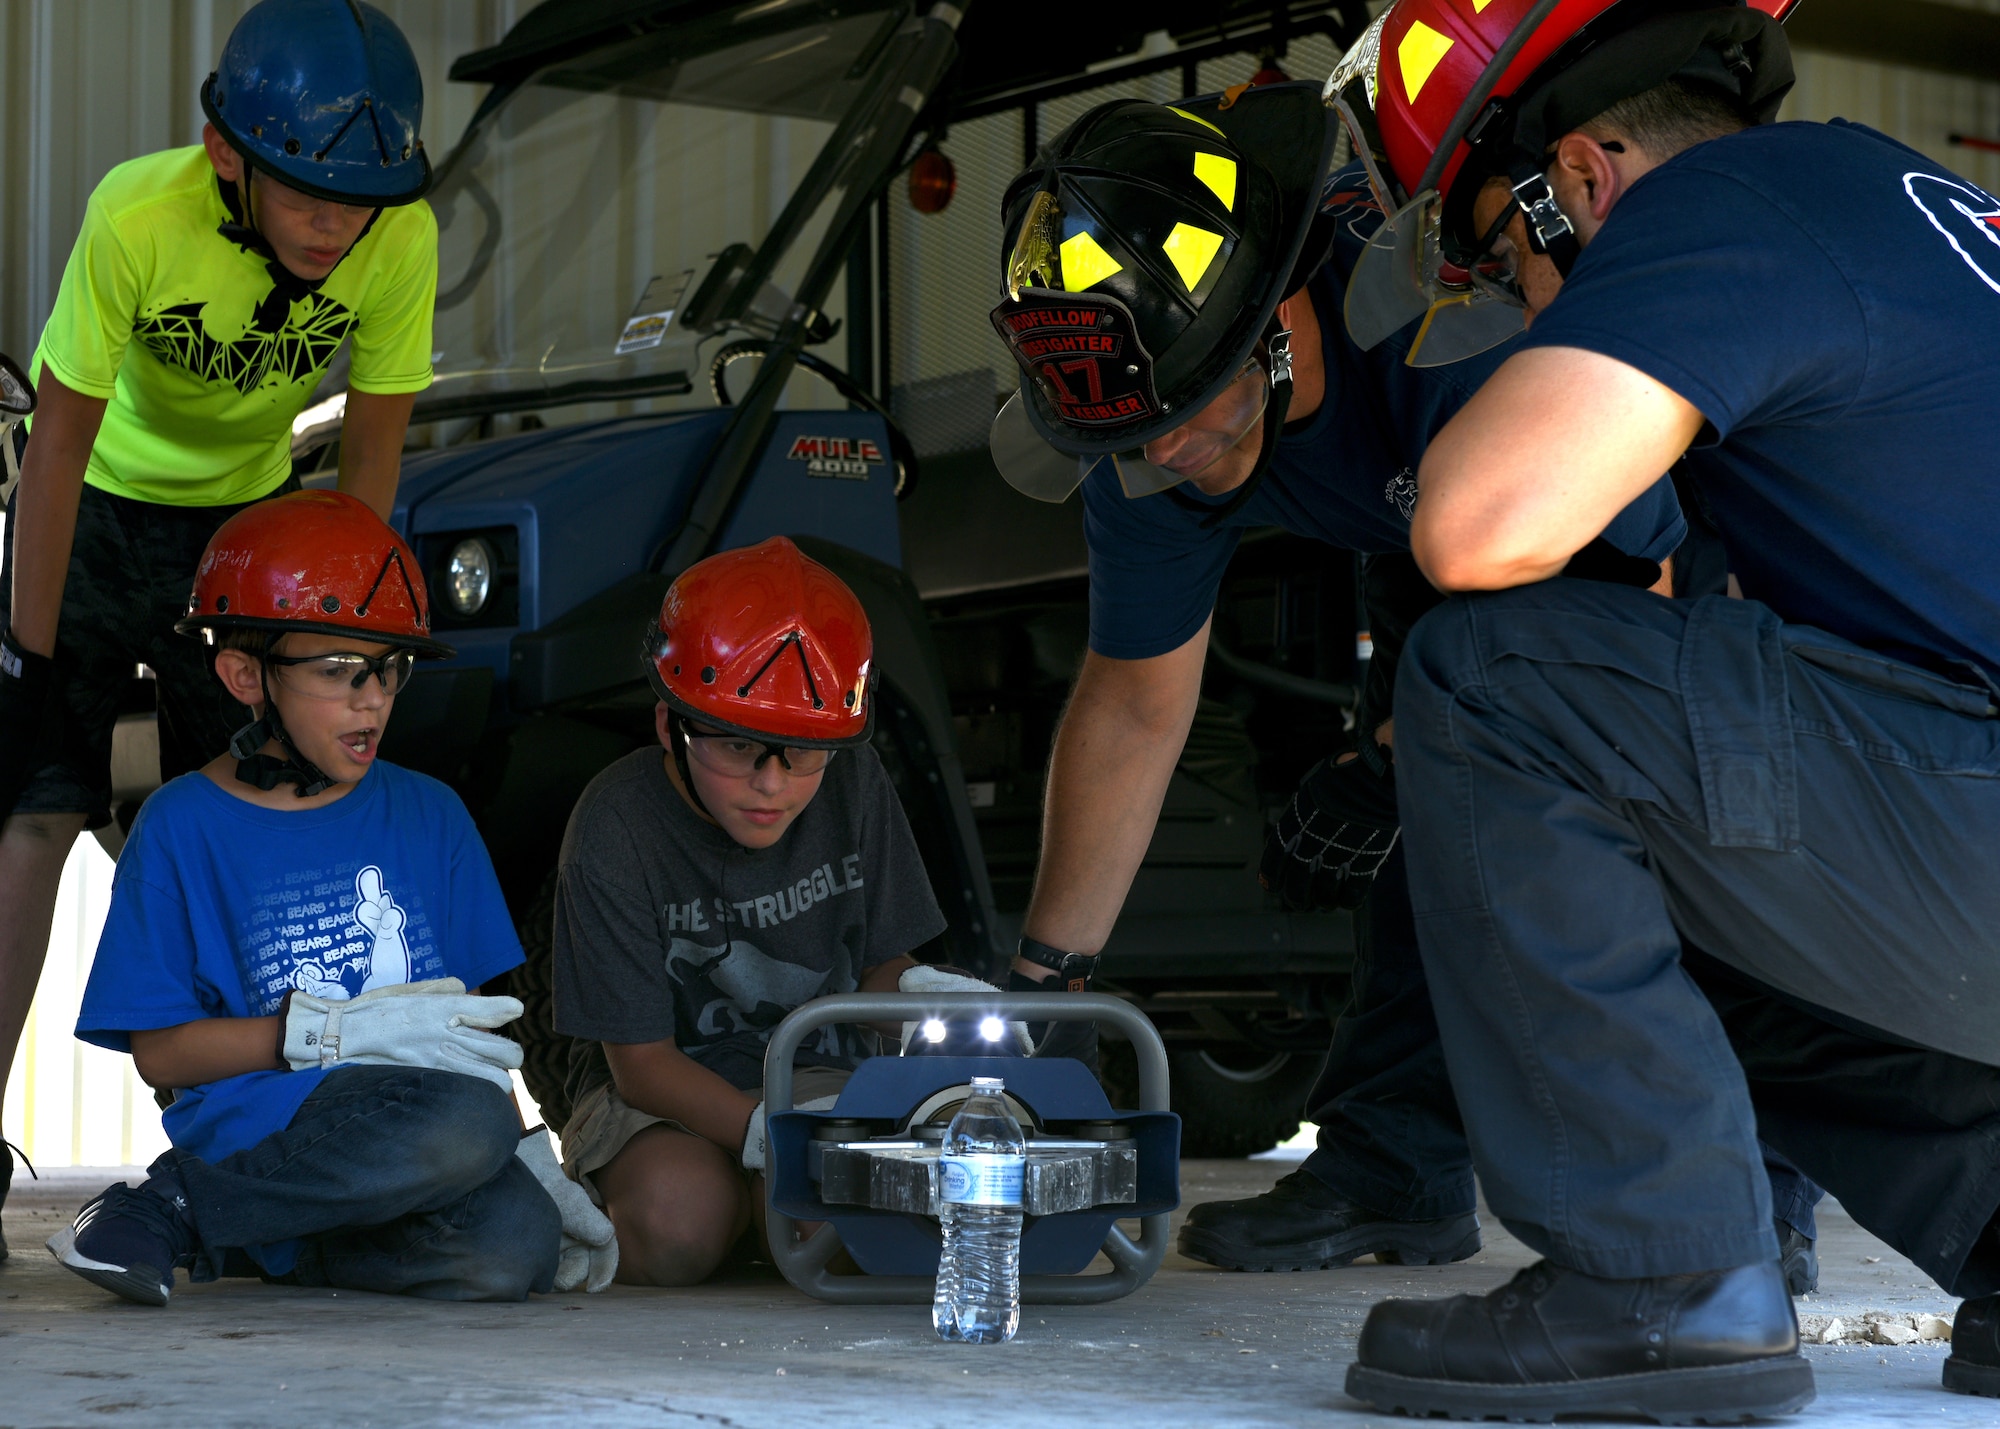 17th Civil Engineering Squadron Firefighters, Bradley Keibler and Captain Daniel Chapa, assist a junior firefighter during a drill in which the children were meant to grip the water bottle with the rescue tools to see how they function at the Goodfellow Air Force Base Fire Department on Goodfellow Air Force Base, Texas, July 16, 2019. They learned just how precise firefighters must be in order to use these tools in emergency situations. (U.S. Air Force photo by Airman 1st Class Robyn Hunsinger/Released)